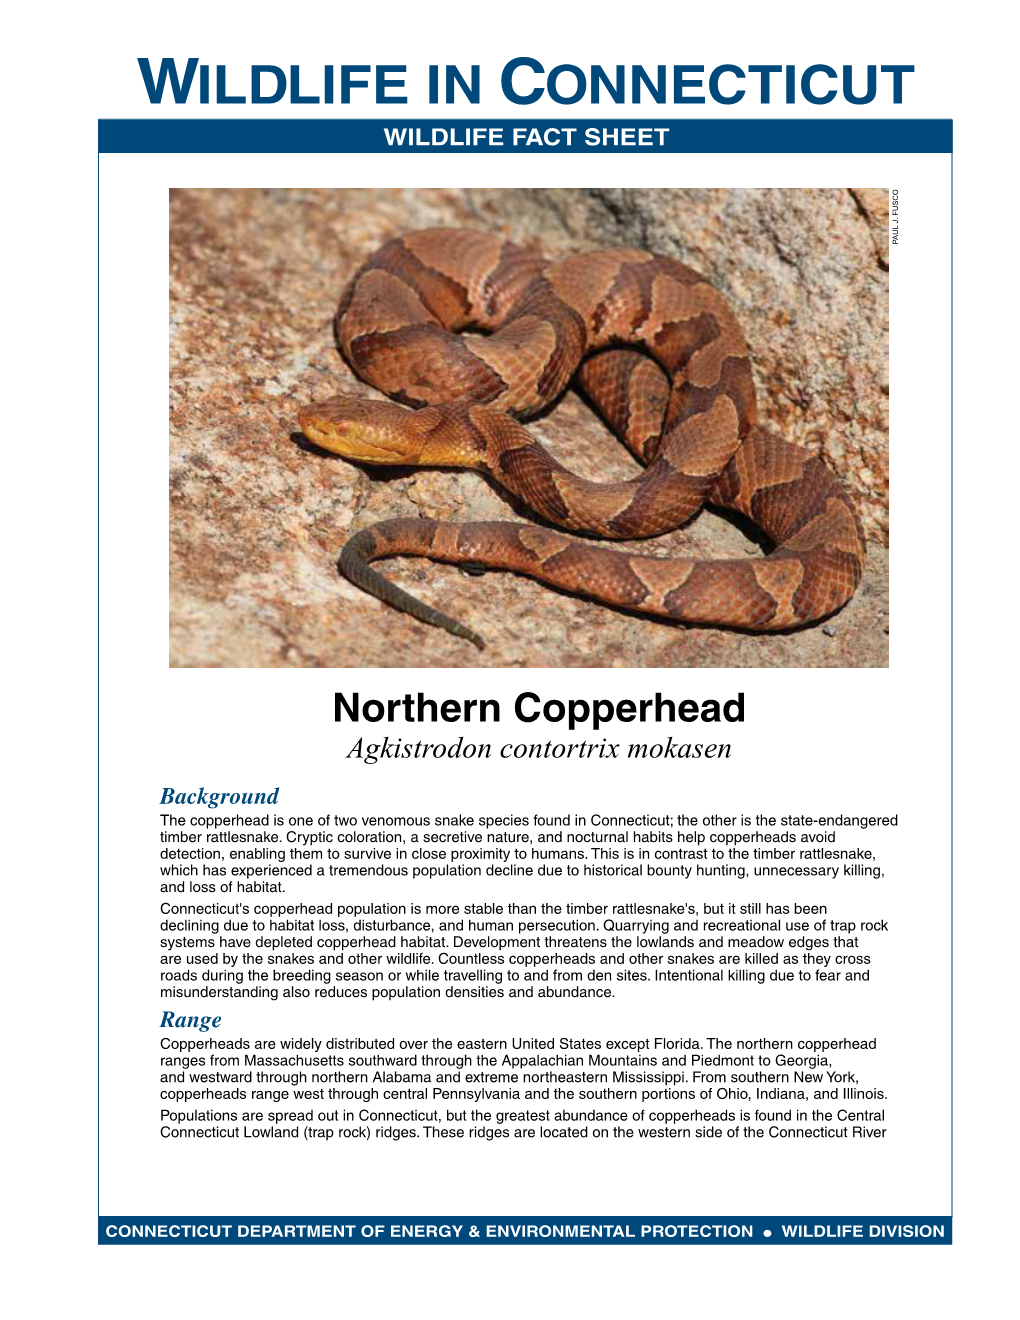 Northern Copperhead Fact Sheet